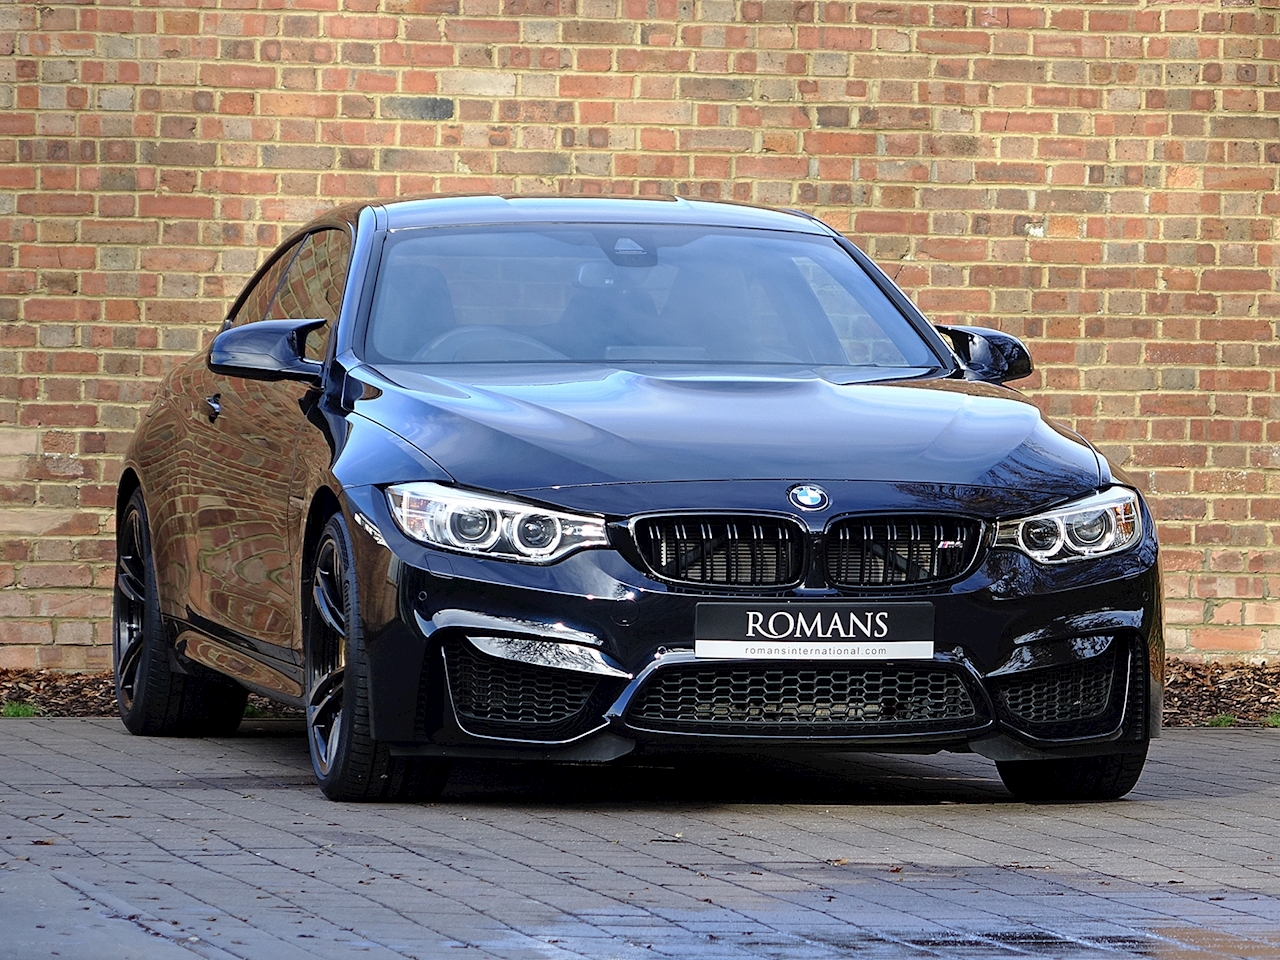 2015 Bmw M4 Coupe For Sale | Motor Memos